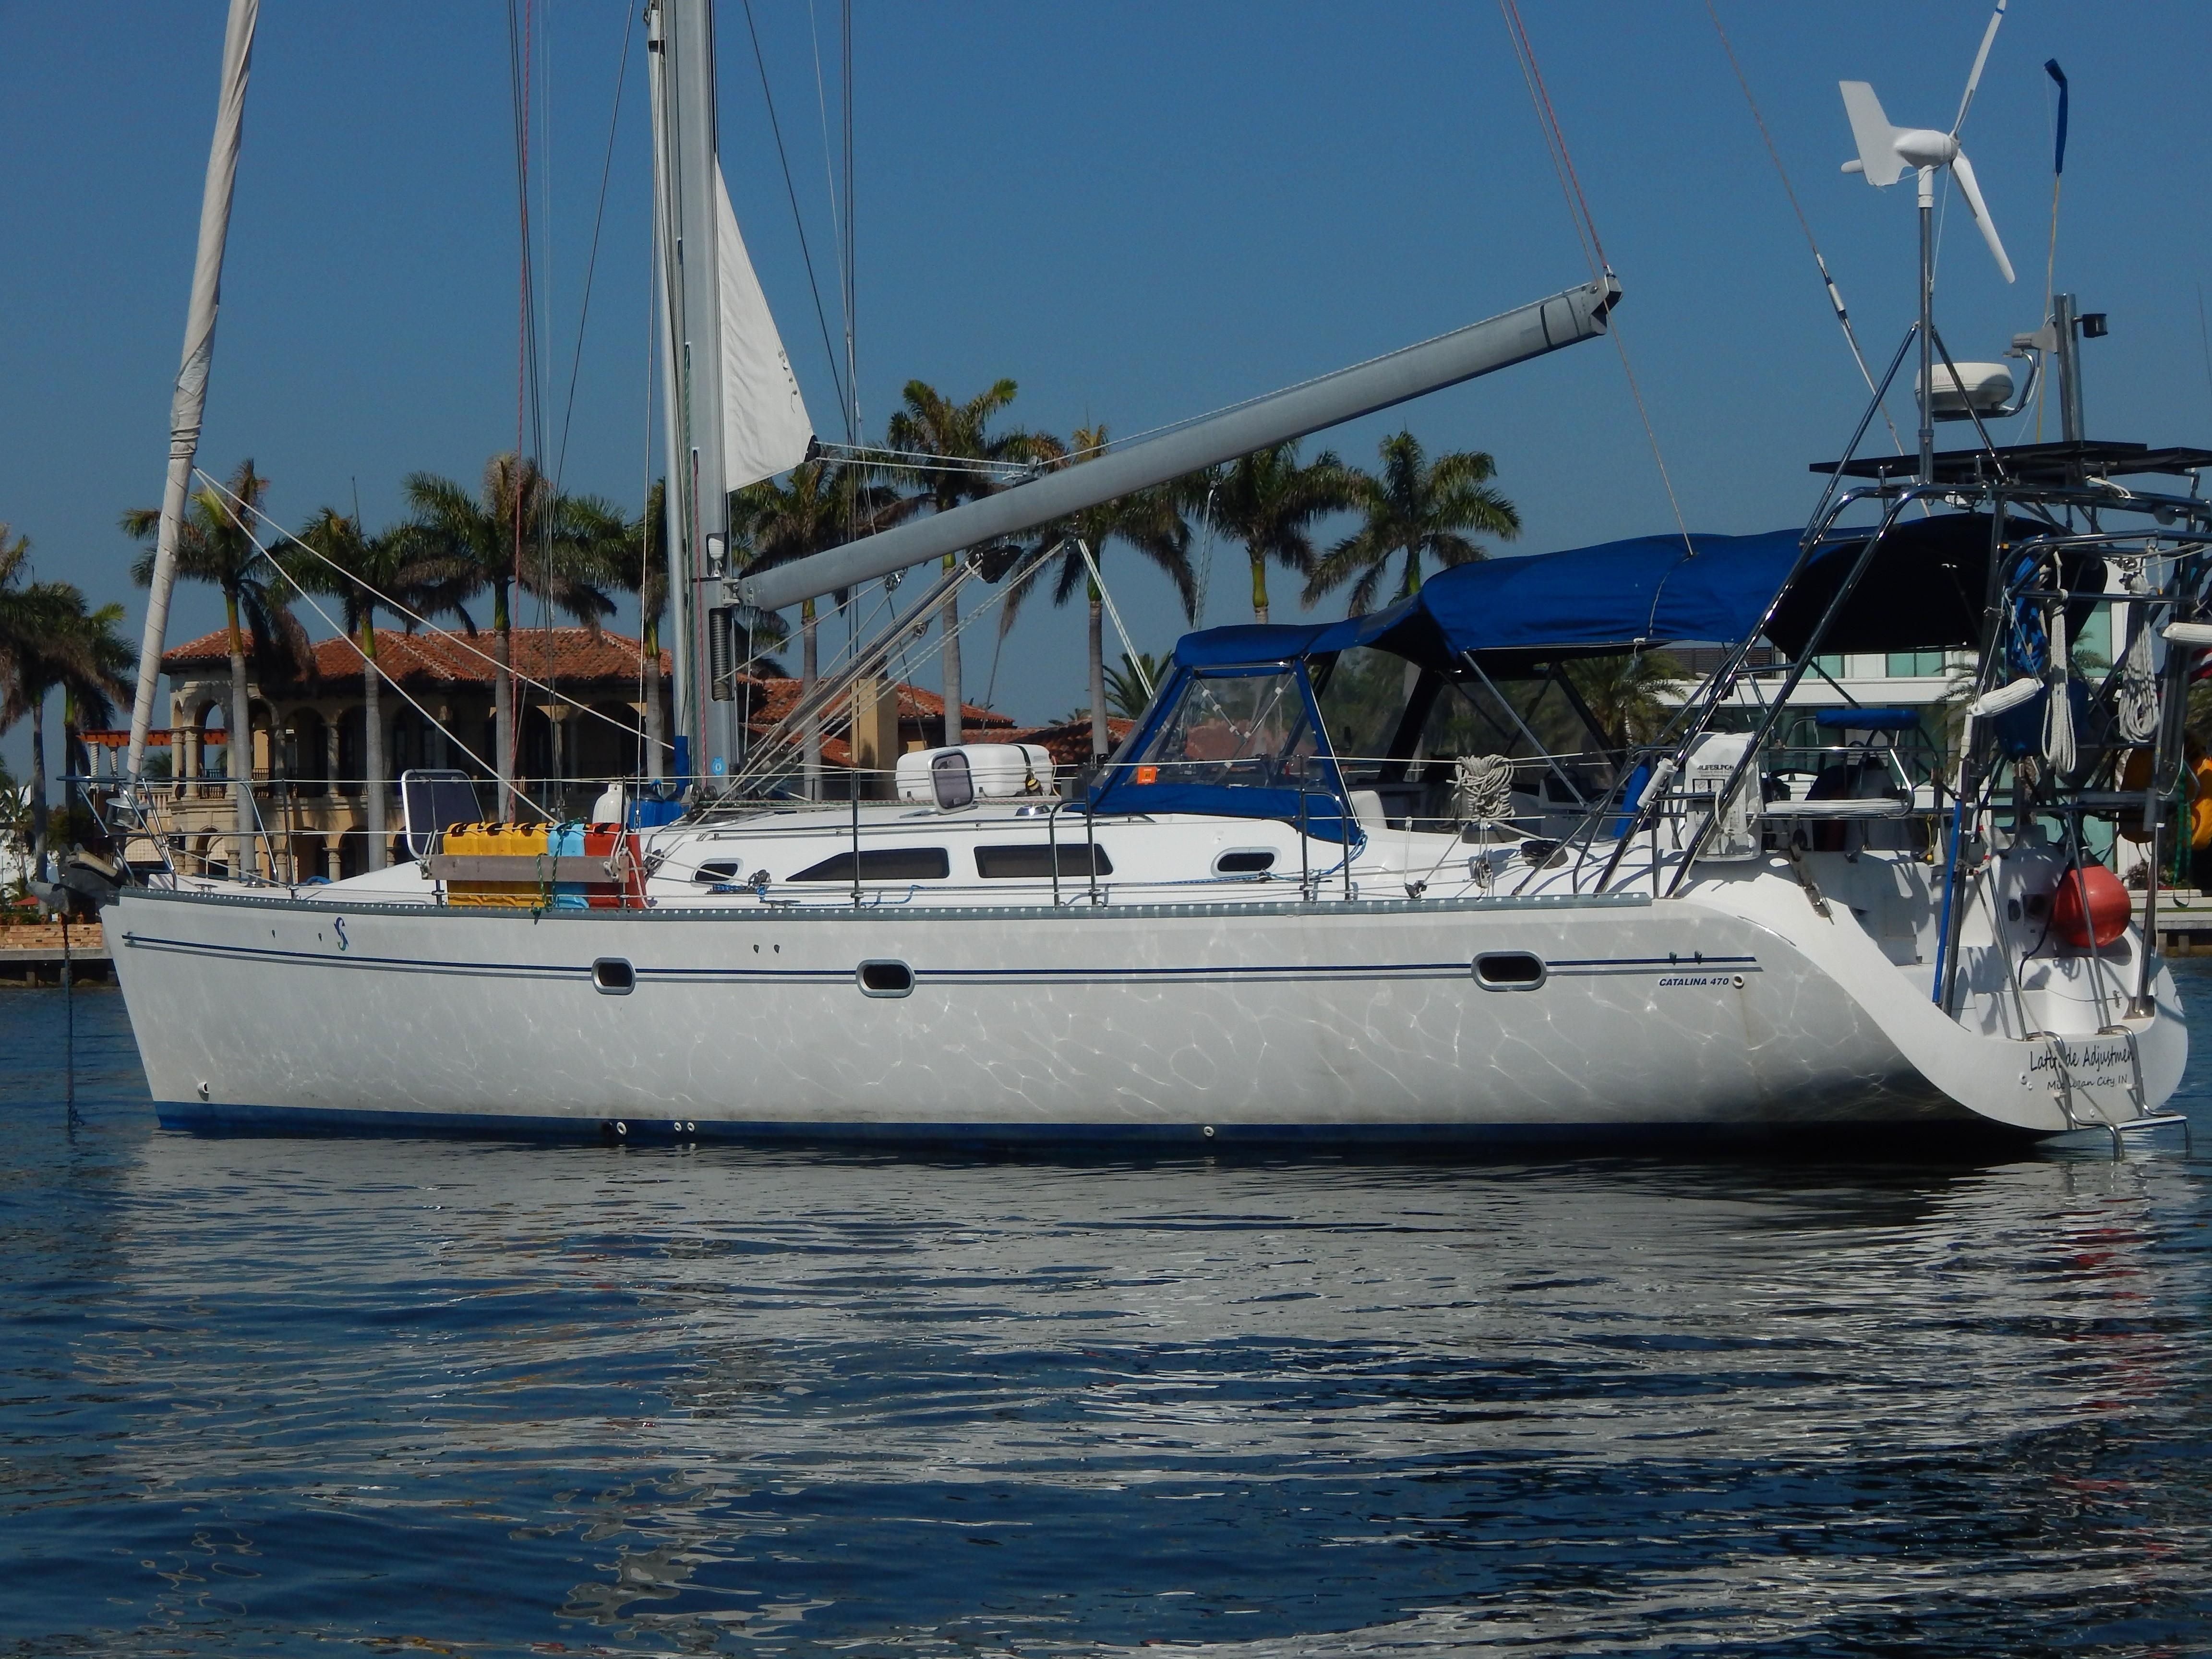 470 sailboats for sale